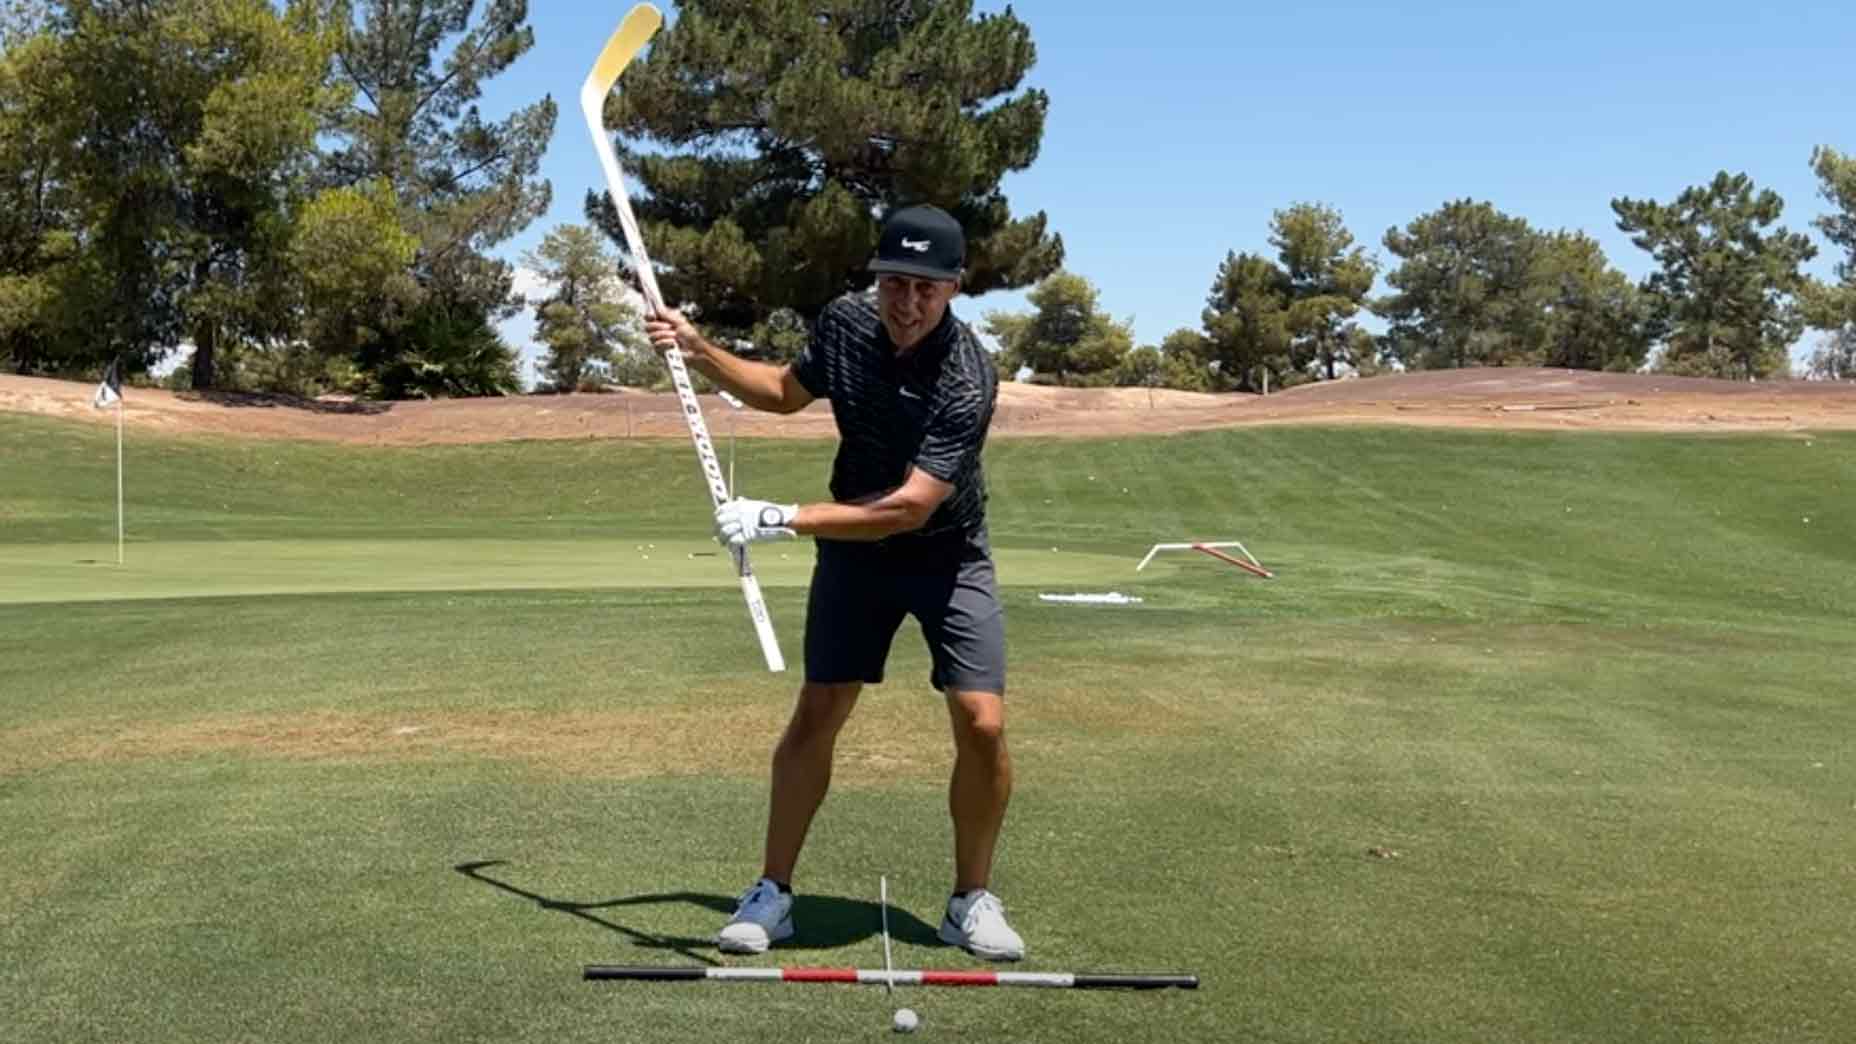 GOLF Top 100 Teacher Martin Chuck shows how to square your golf club face and eliminate slices by using a hockey stick for practice